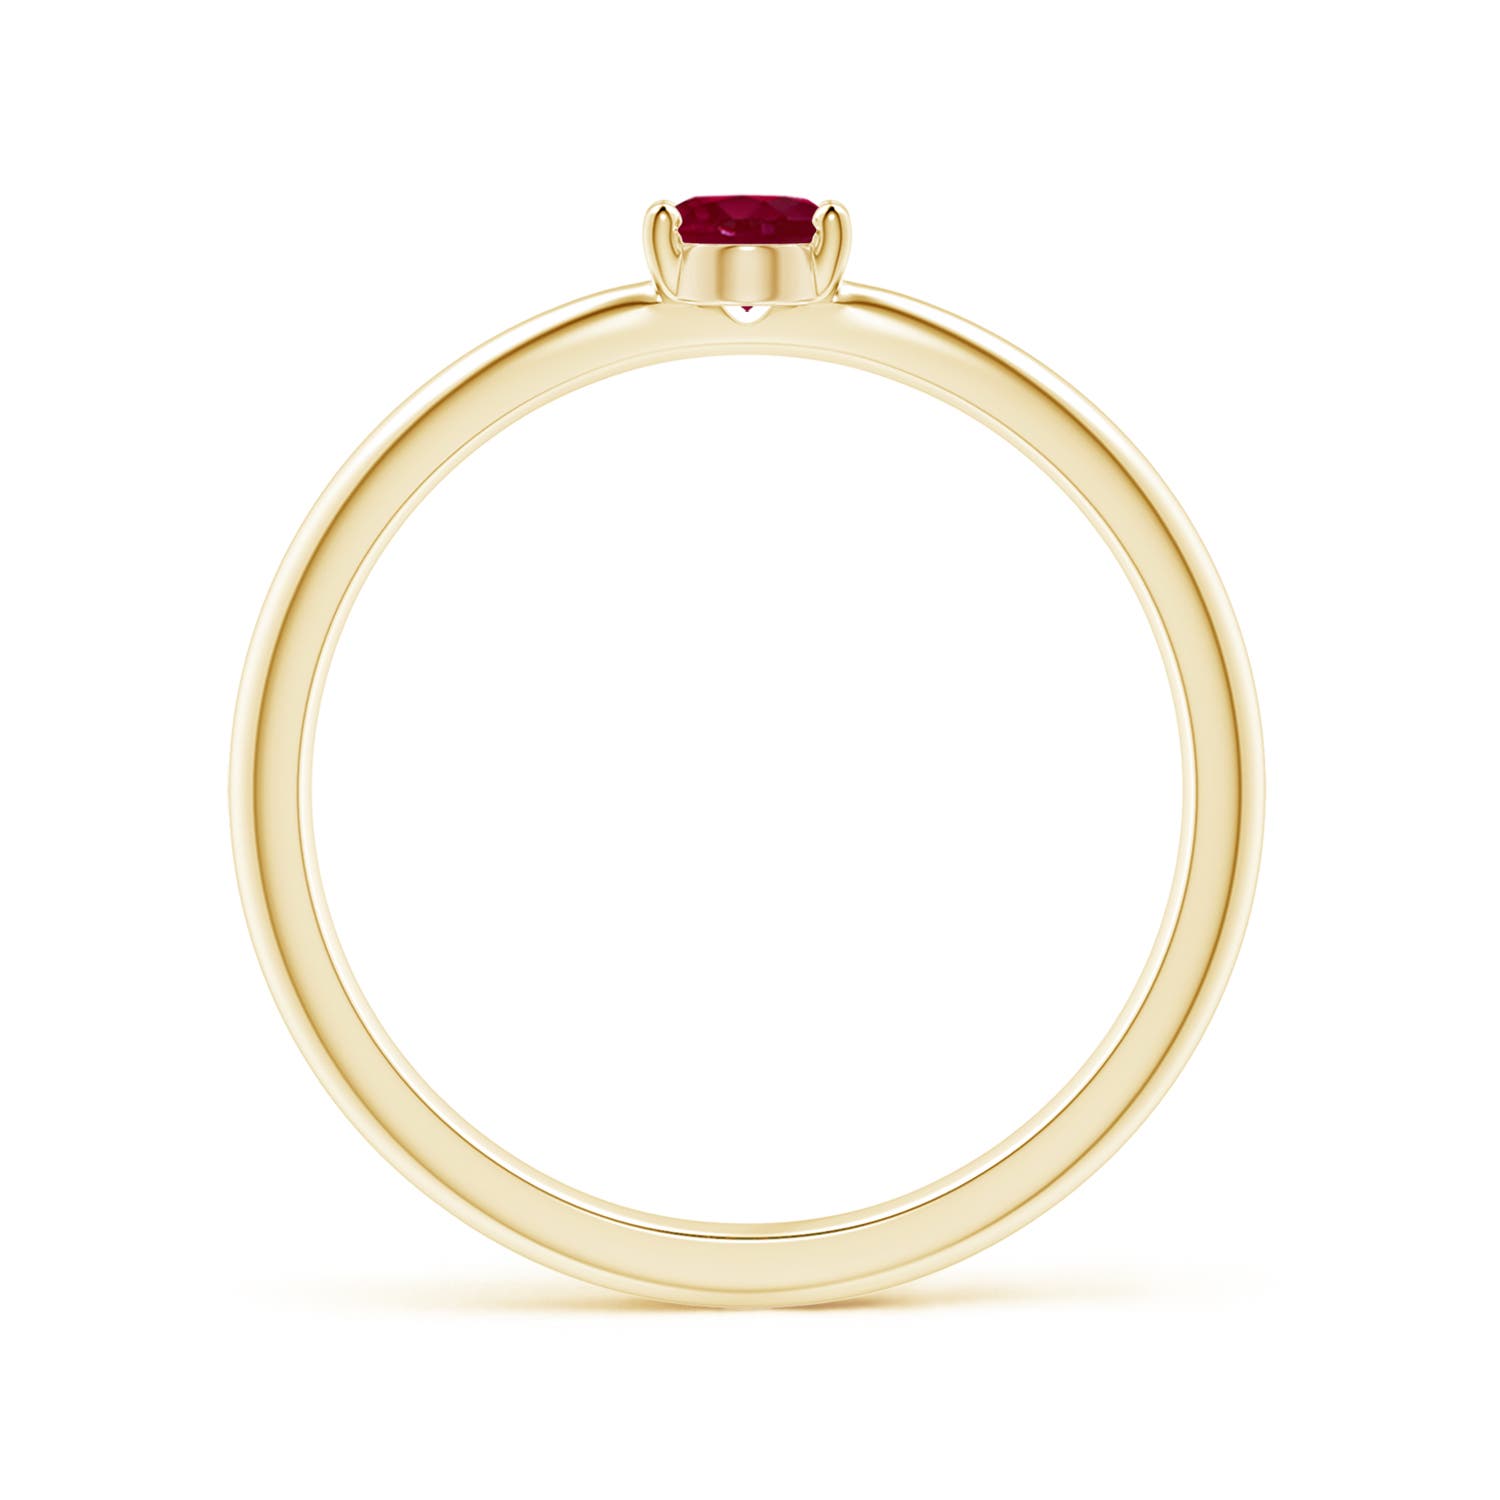 A - Ruby / 0.4 CT / 14 KT Yellow Gold